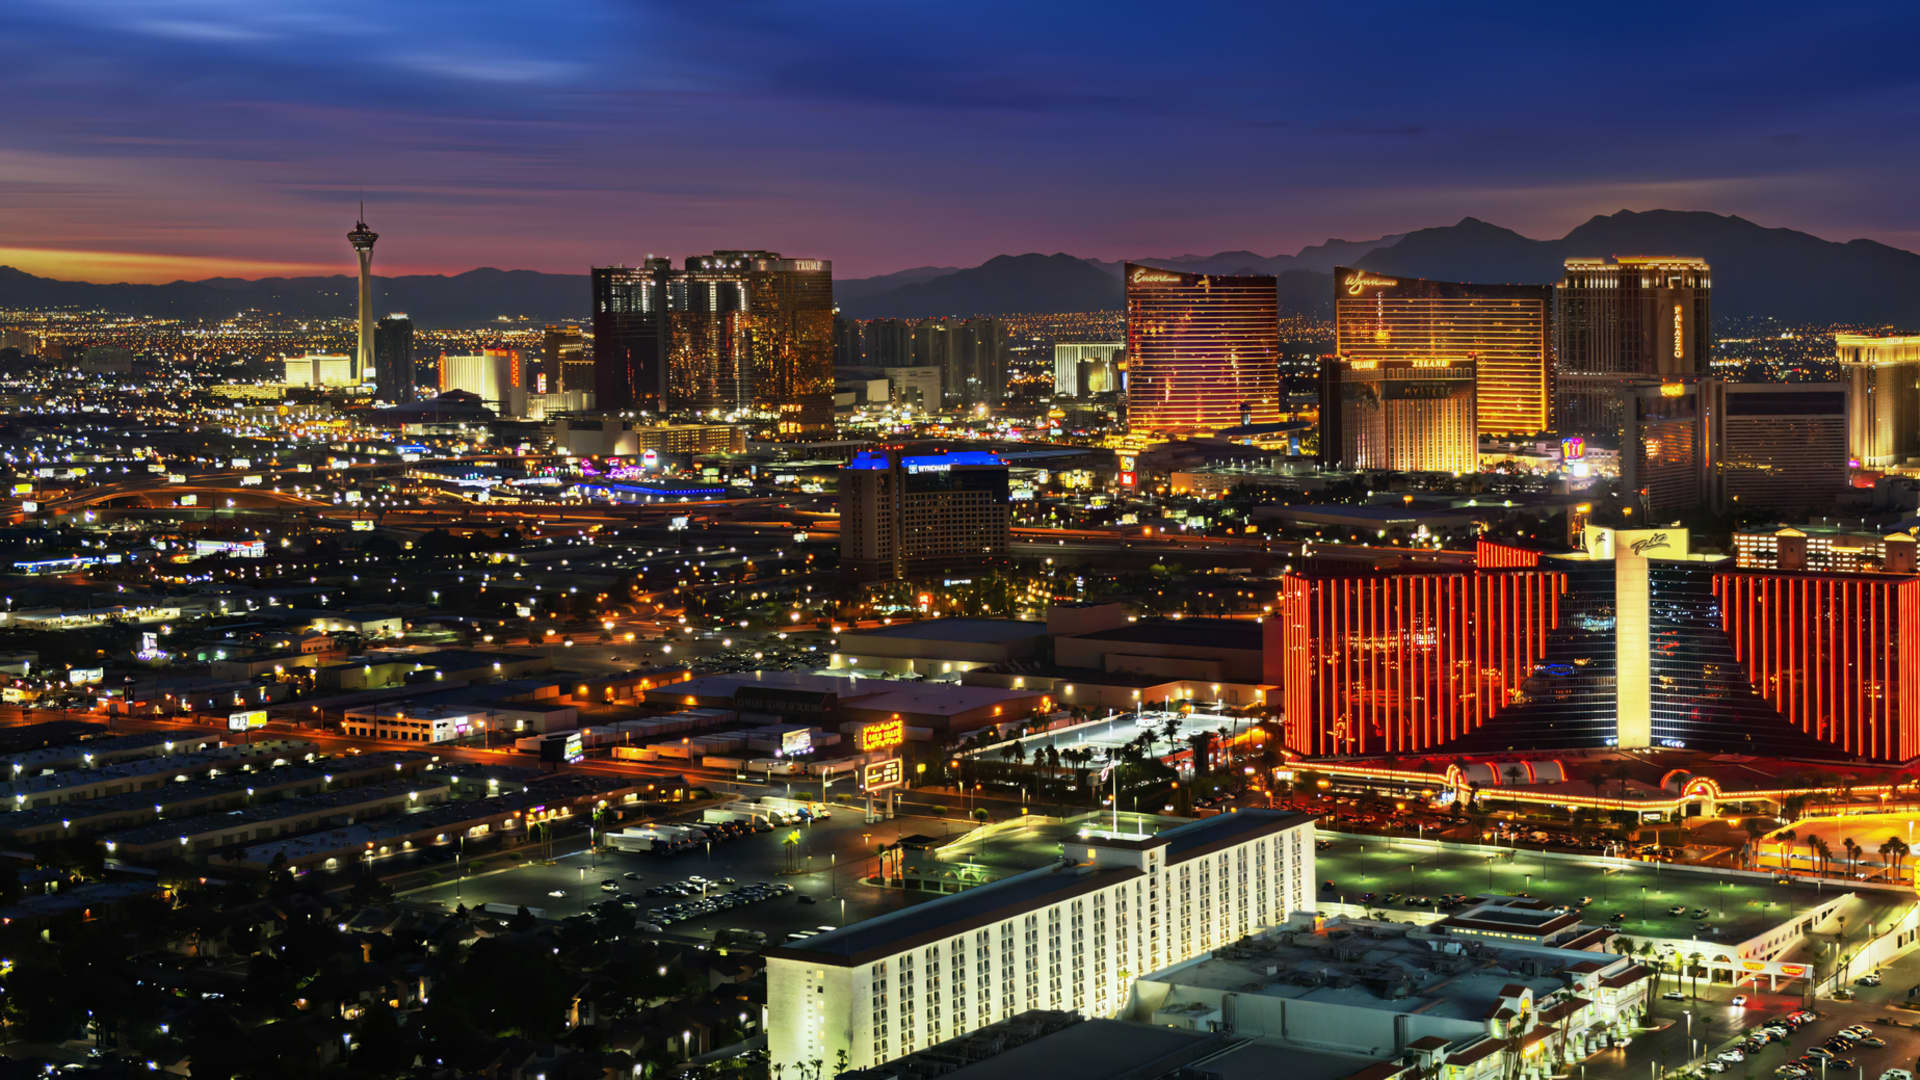 Las Vegas has invested billions into sports. The question is, will it pay off?